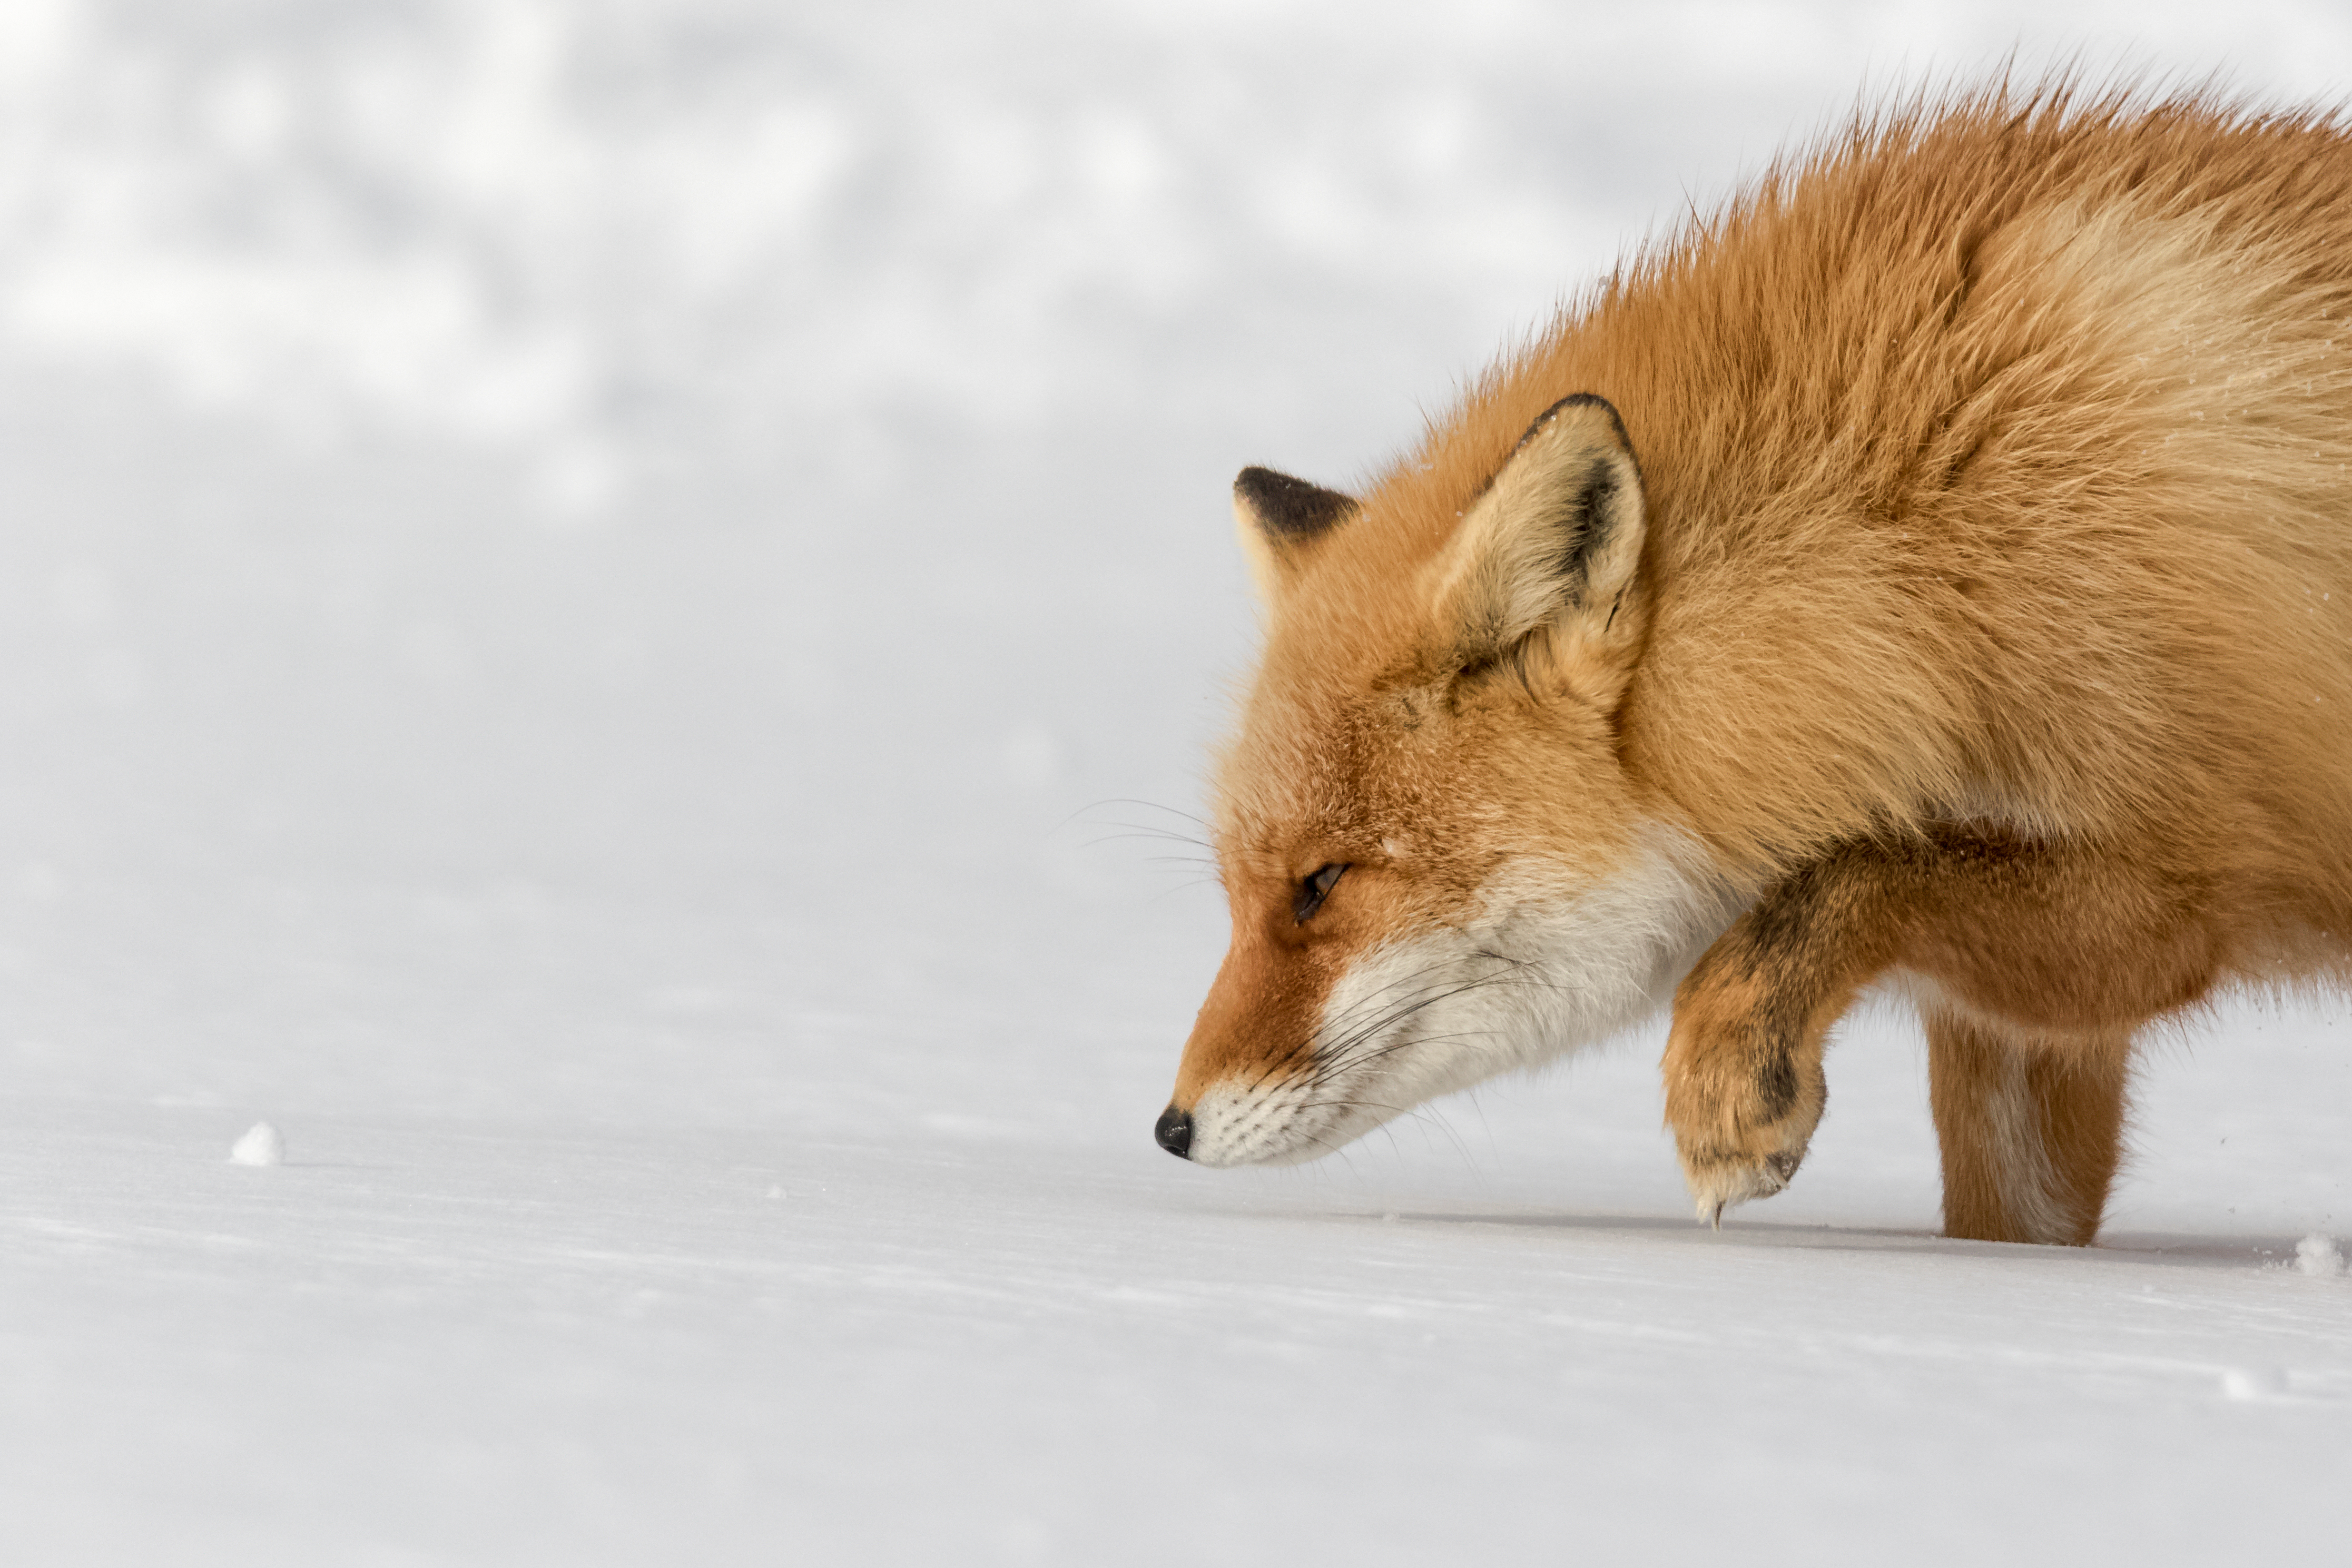 A fox stalking in the snow